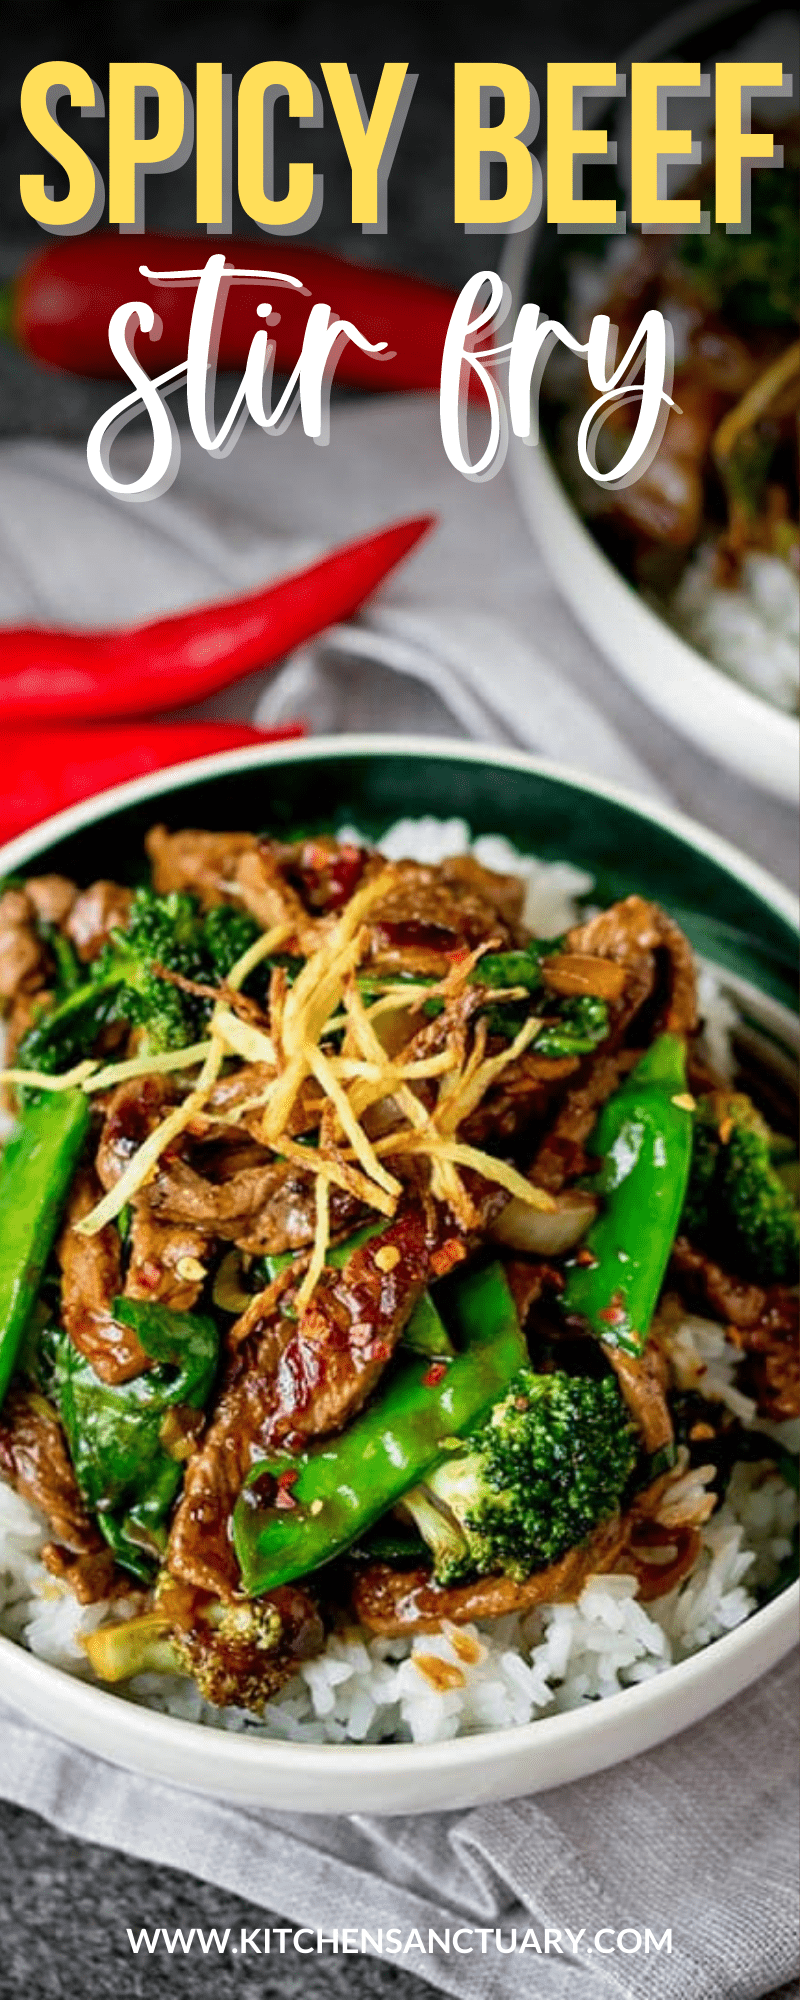 Spicy Ginger Beef Stir Fry plus video - Nicky's Kitchen Sanctuary